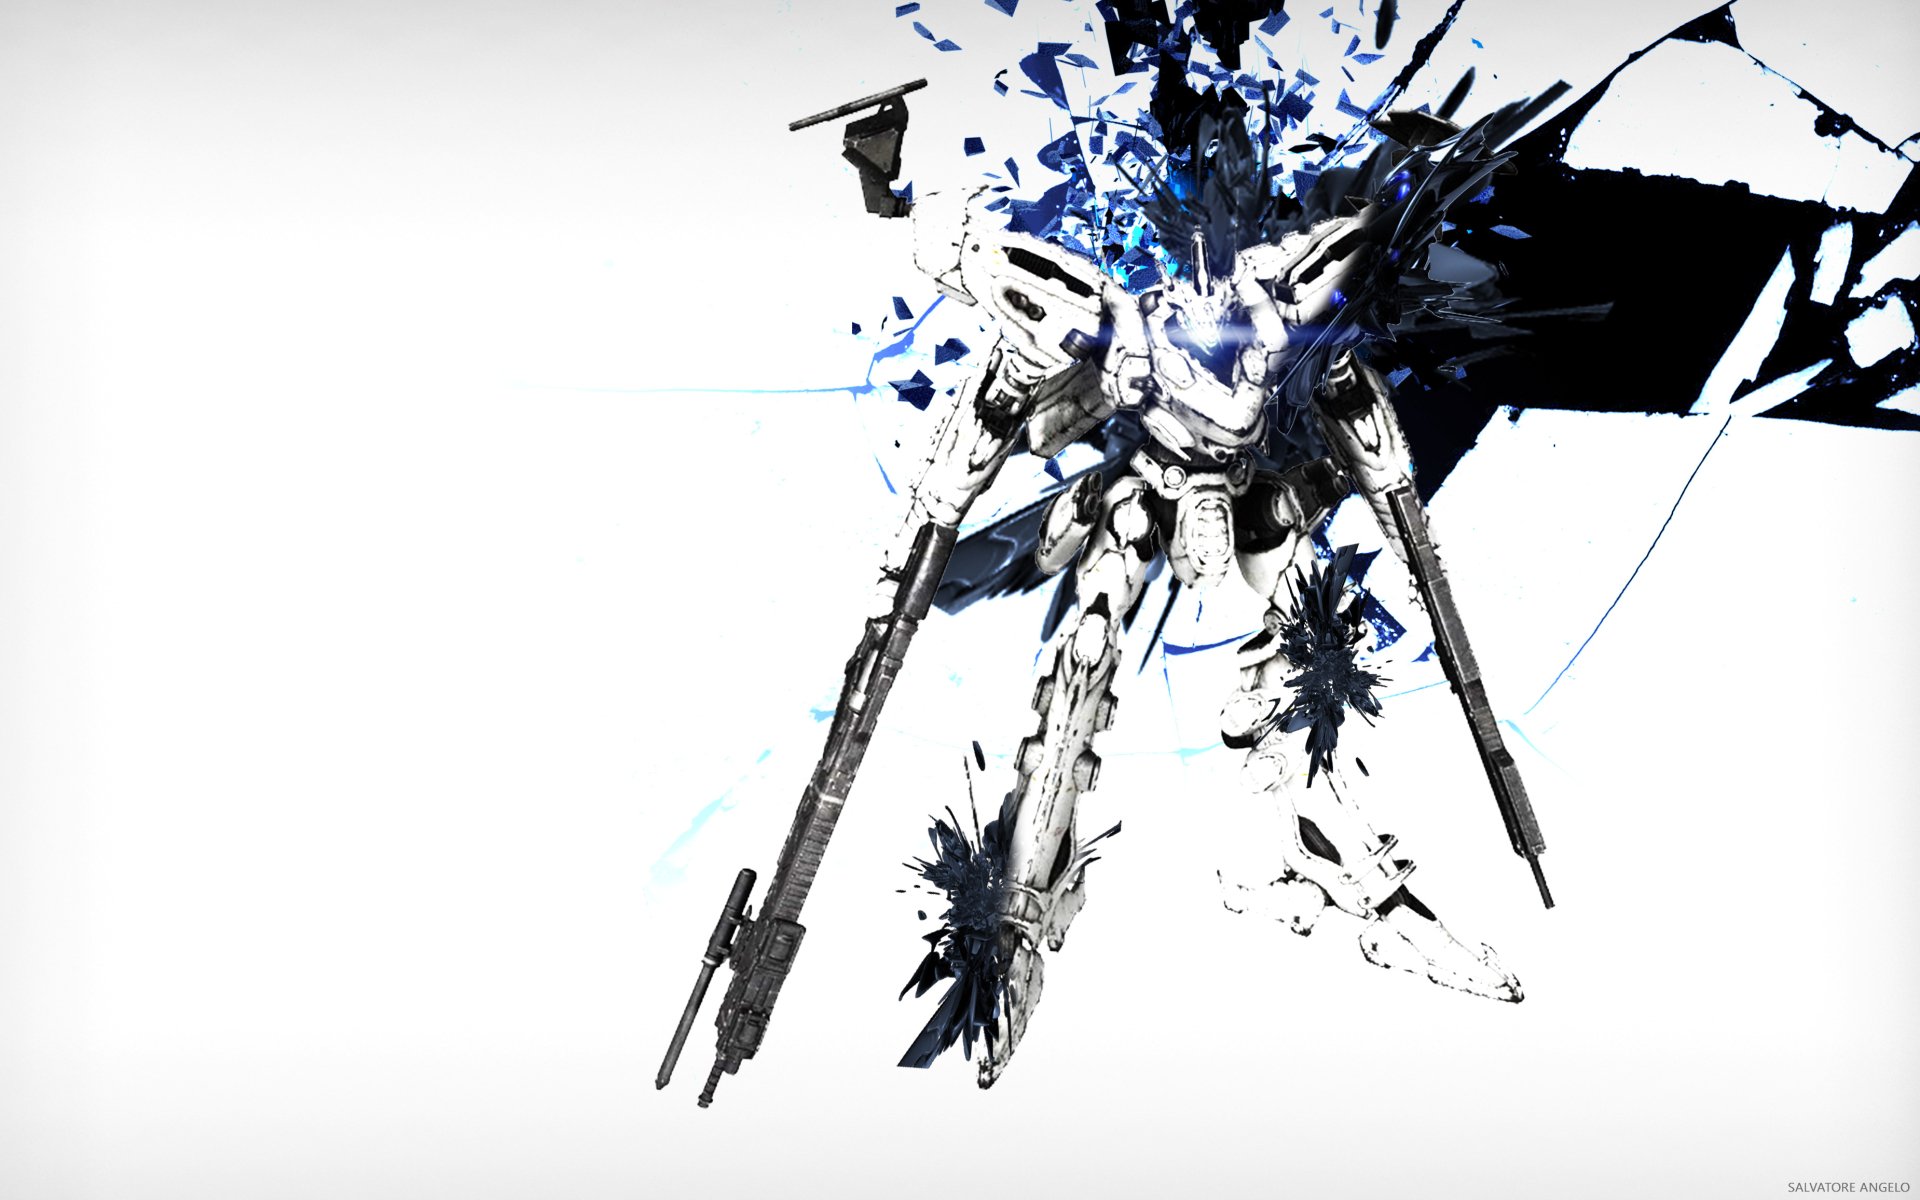 Armored Core 4 HD Wallpapers and Backgrounds